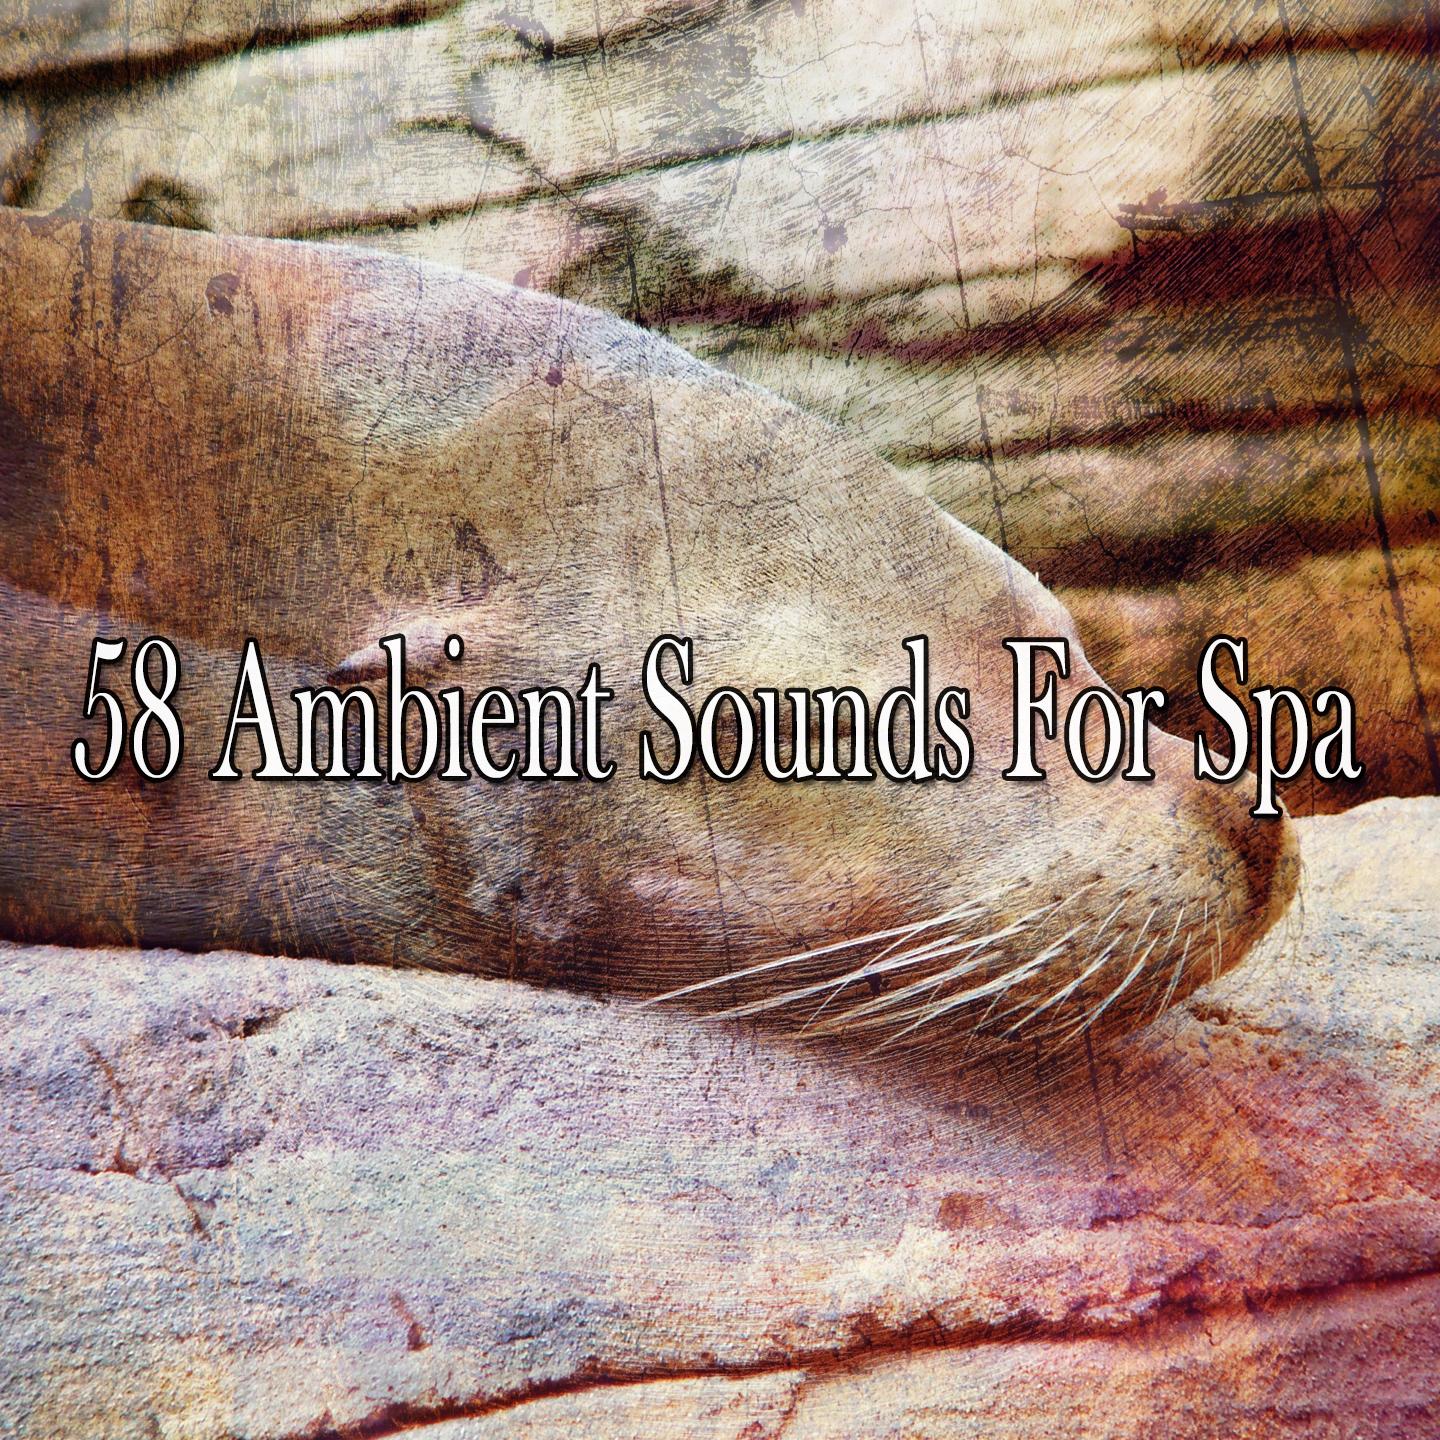 58 Ambient Sounds for Spa